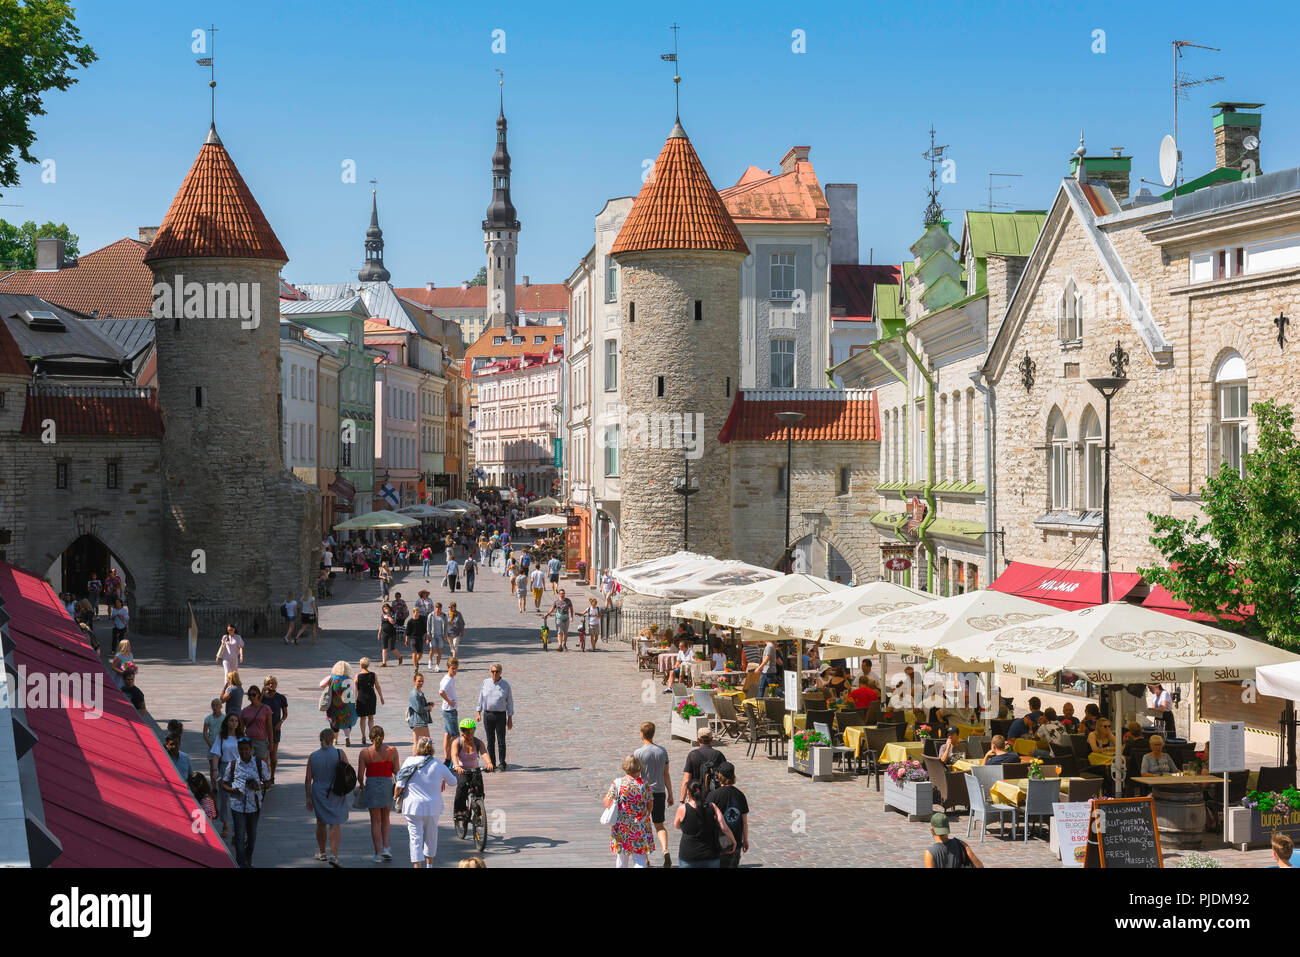 Tallinn summer city, view of the scenic Viru Gate in Tallinn - the eastern entrance to the central medieval Old Town quarter of the city, Estonia. Stock Photo